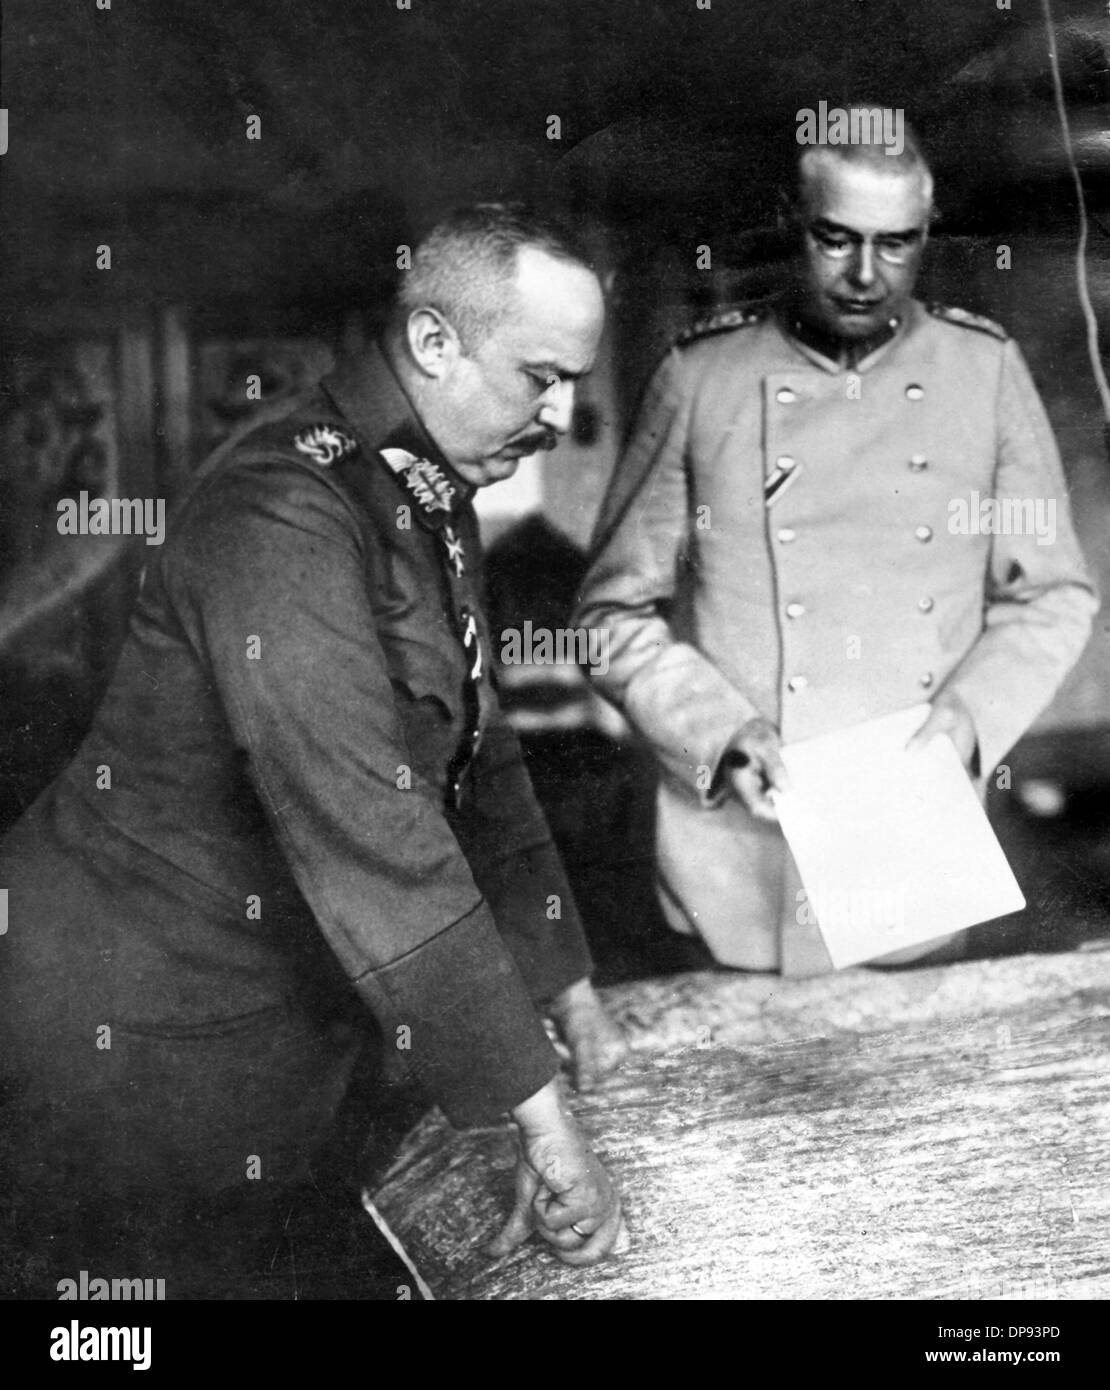 German General Erich Ludendorff (l) in Prussian military uniform during military strategic planning on the Eastern Front with General May Hoffmann around 1915/1916. Ludendorff (1865-1937) was Quartermaster General and part of the Third Supreme Command of the German Imperial Army in World War I. Fotoarchiv für Zeitgeschichte Stock Photo